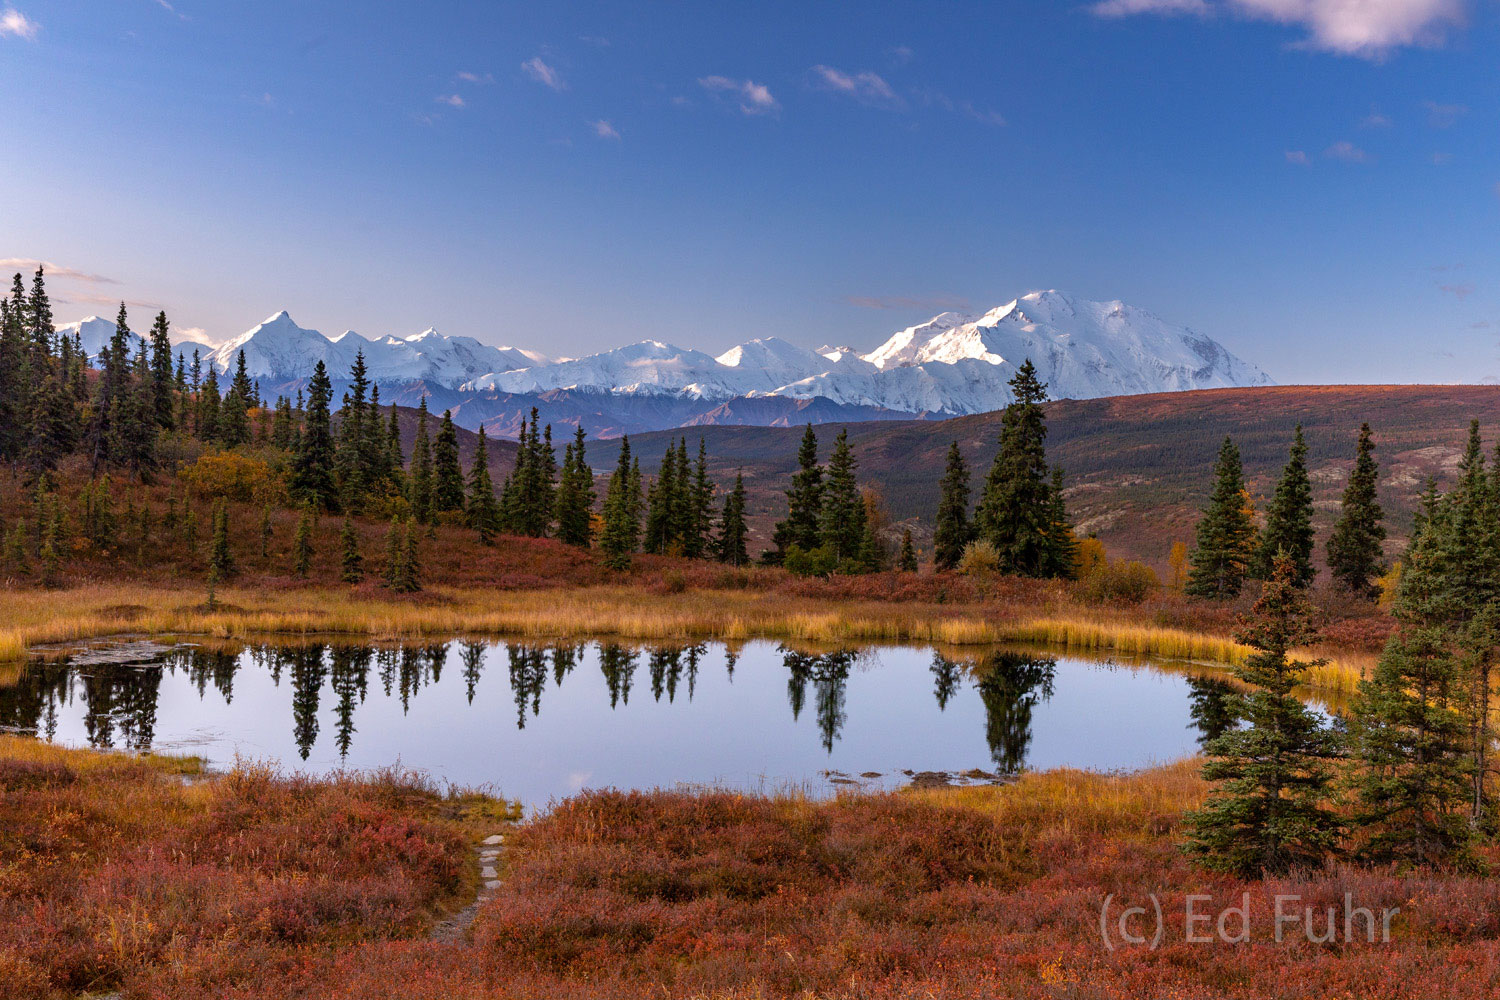 The Alaskan Range and Mount Denali beckon in the distance beyond Nugget Pond